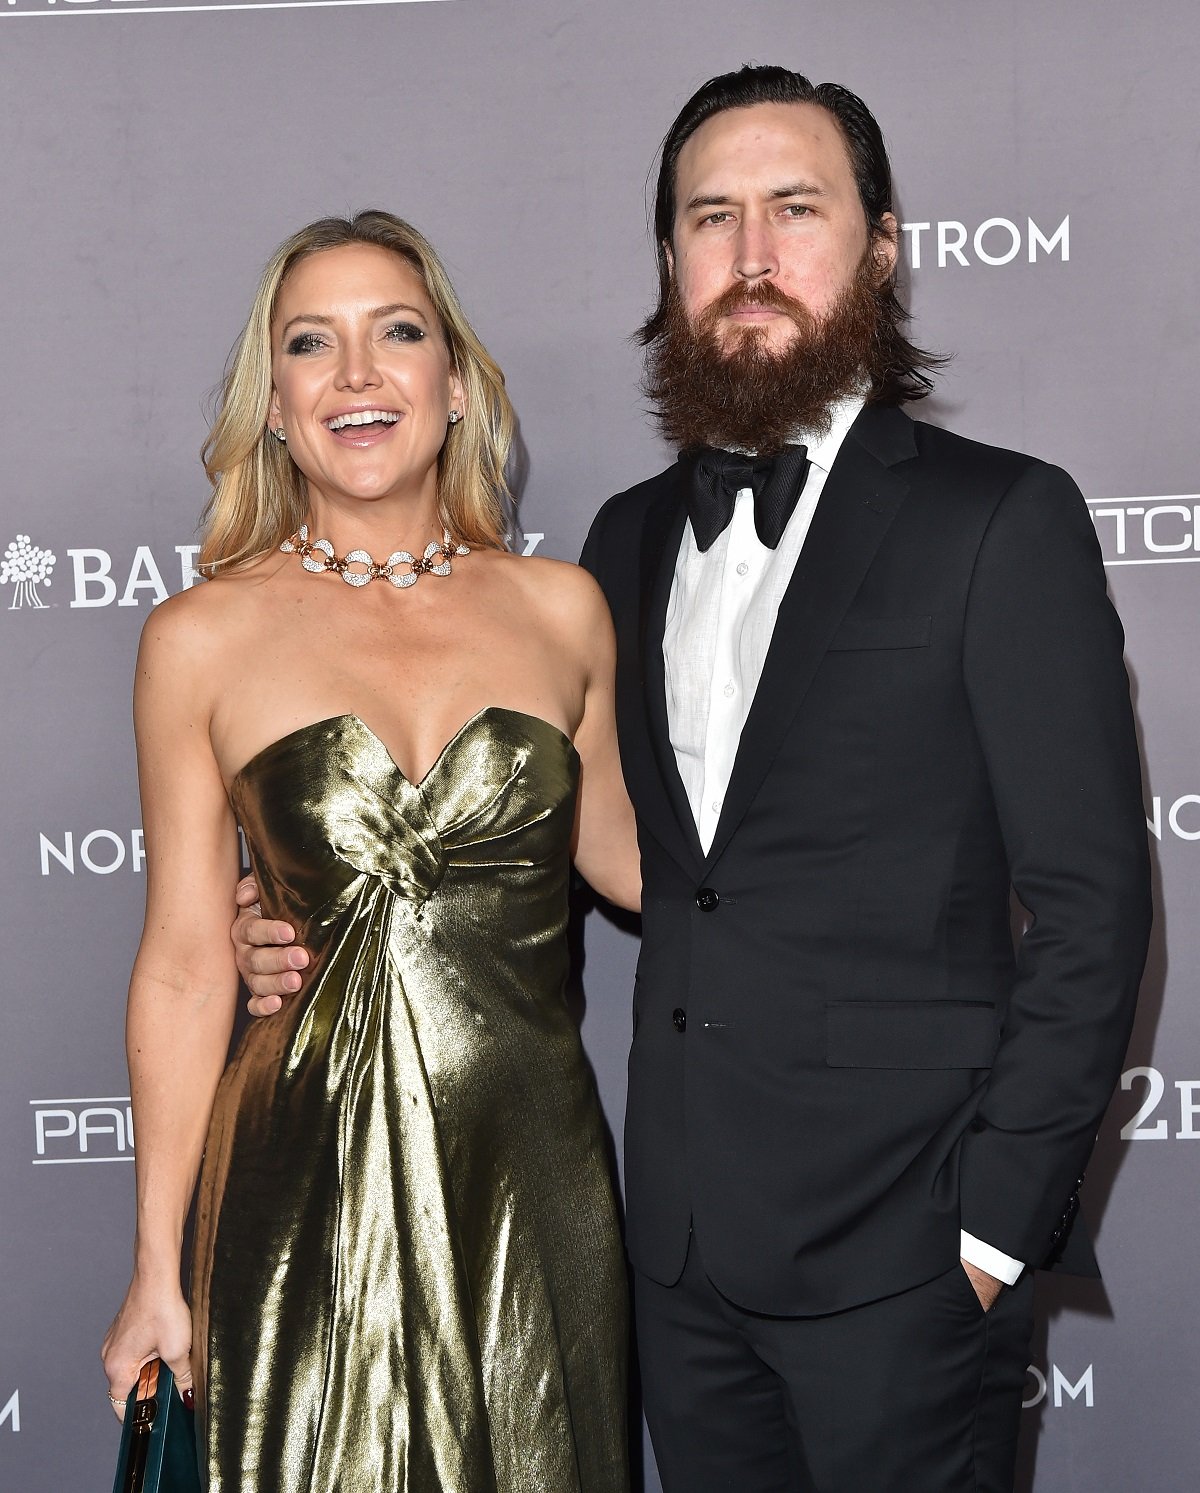 Kate Hudson dons a shimmering gold gown while posing arm-in-arm Danny Fujikawa at the 2019 Baby2Baby Gala